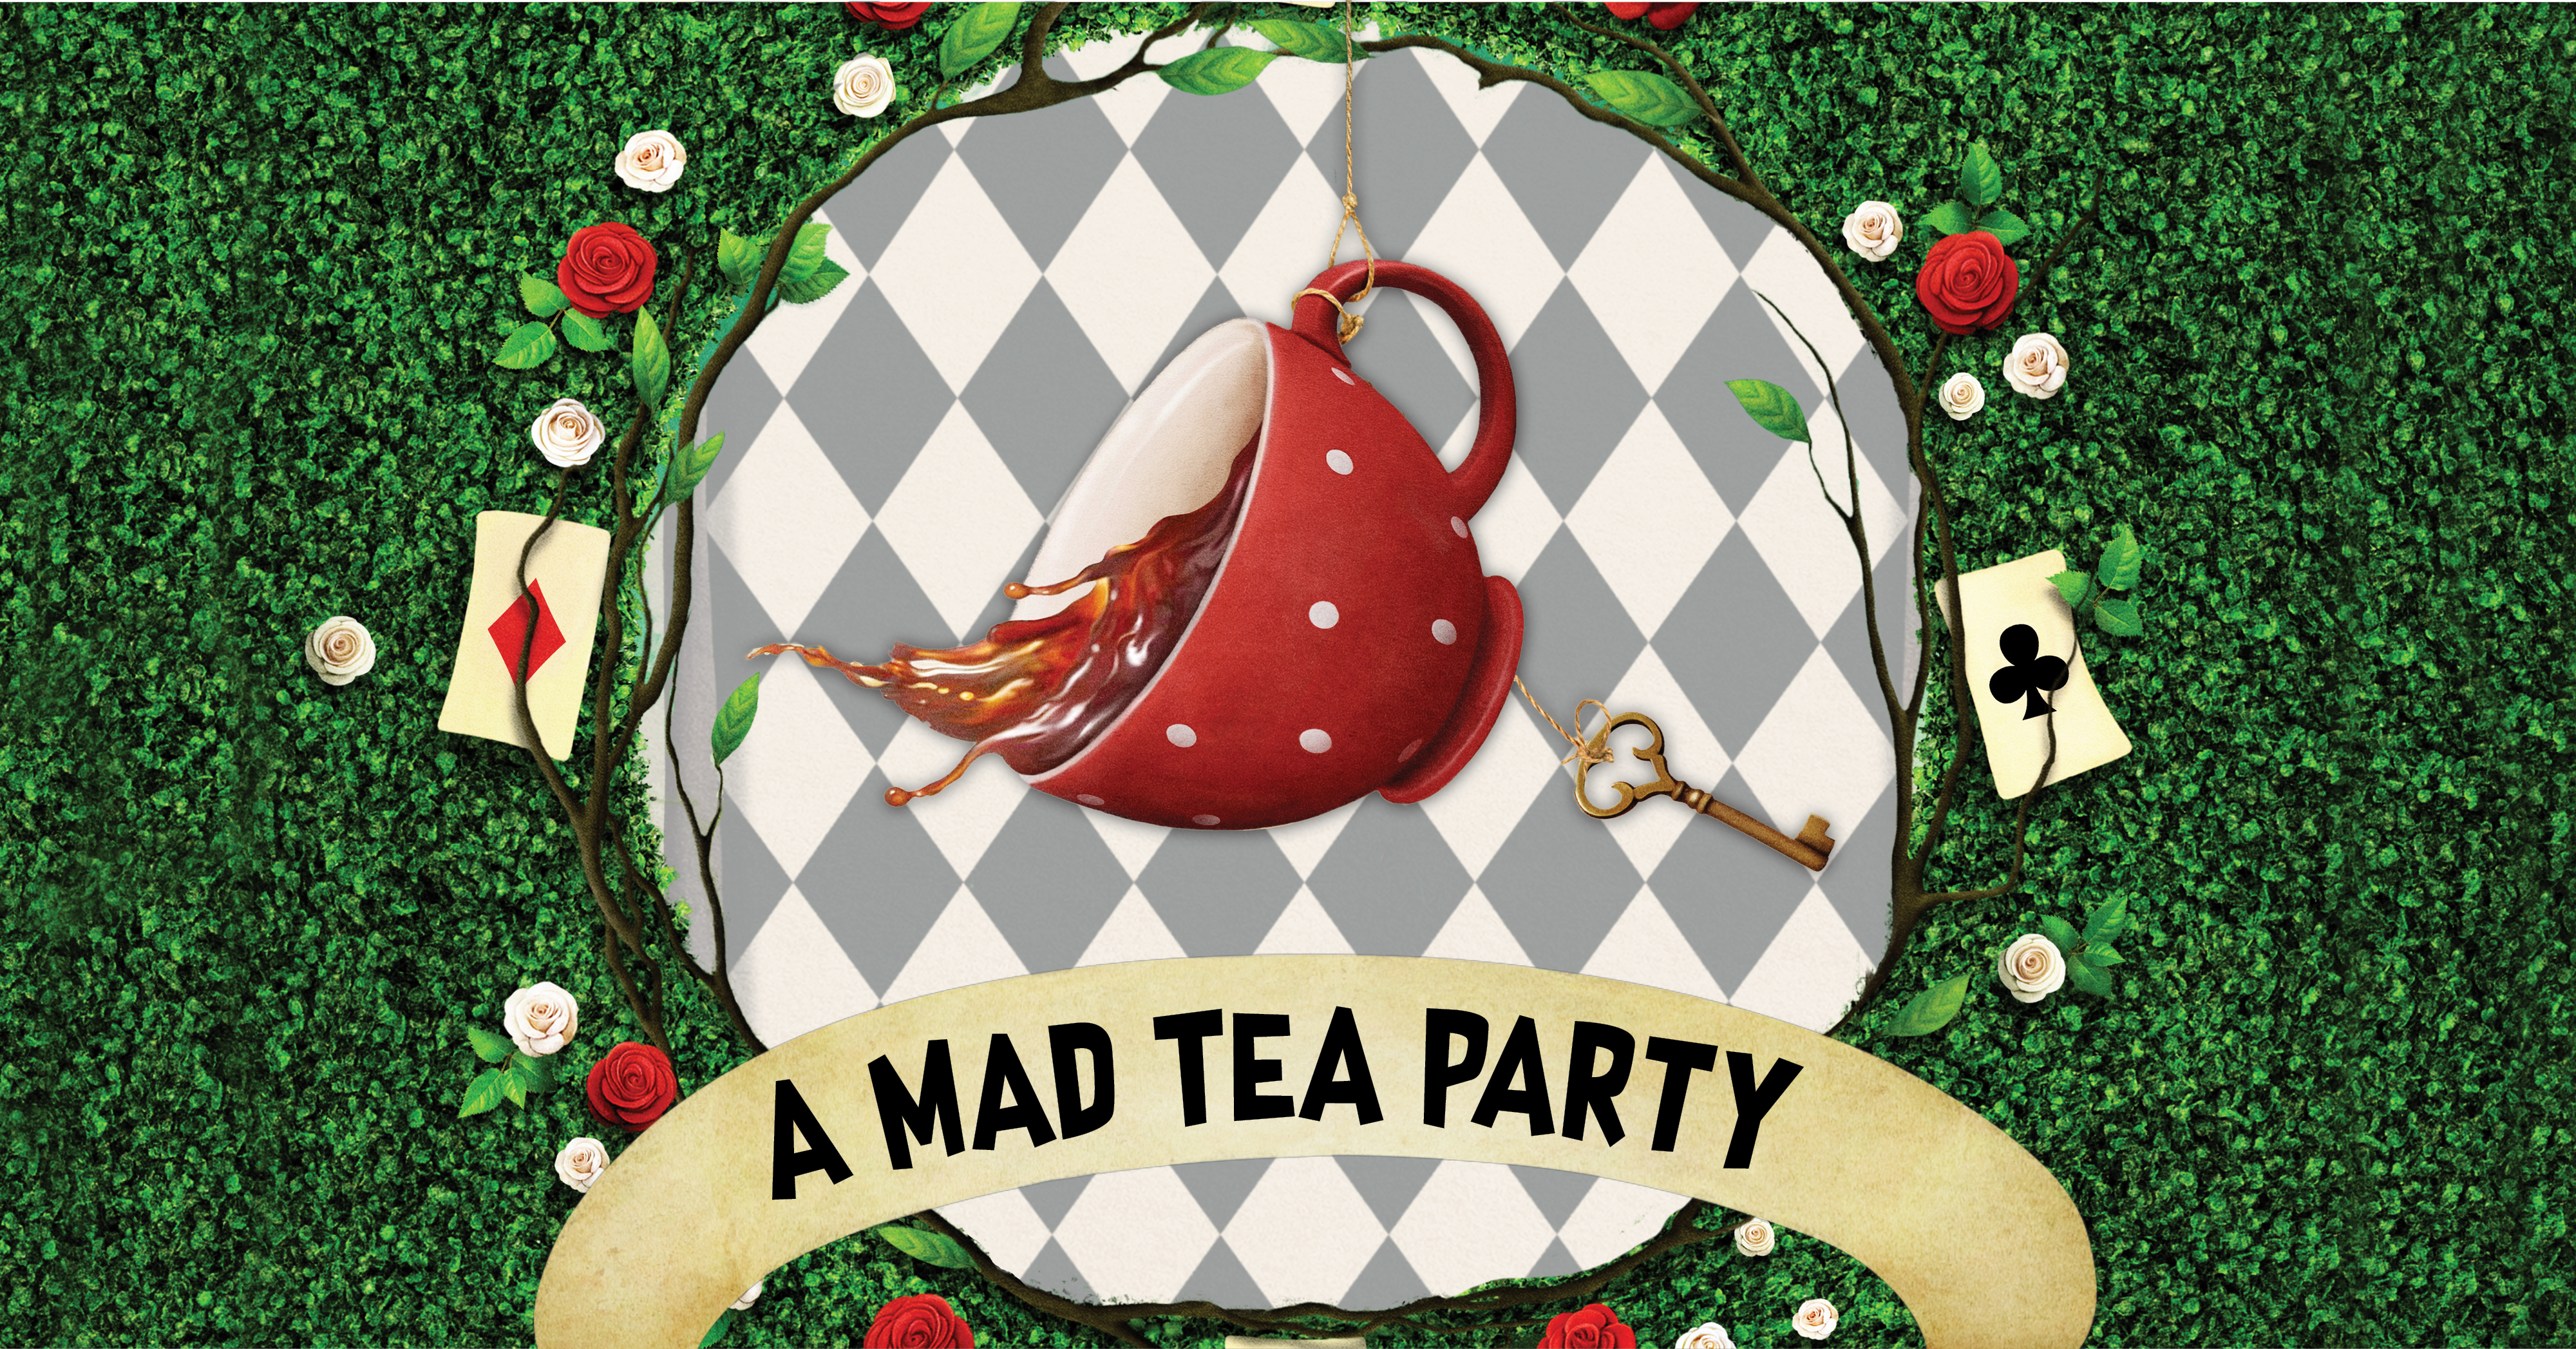 Swinging teacup with text A Mad Tea Party